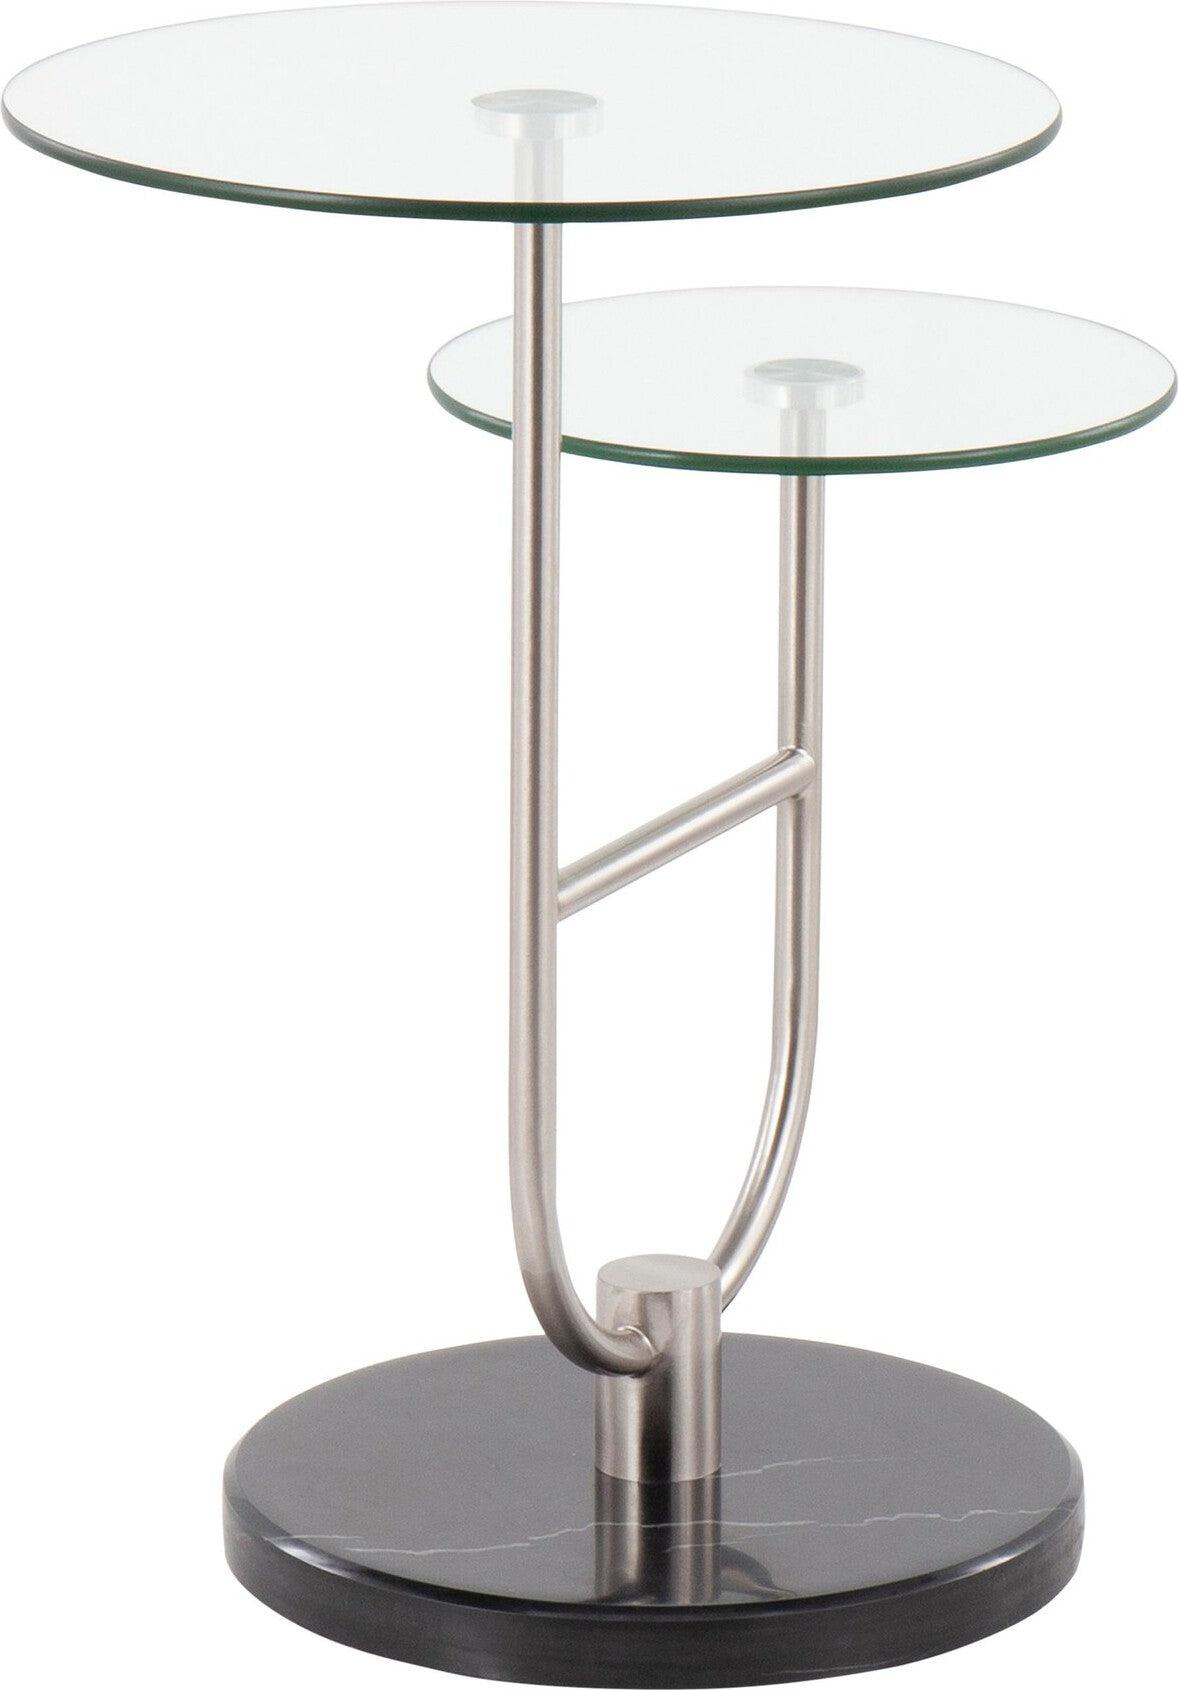 Lumisource Side & End Tables - Trombone Side Table Black Marble & Nickel